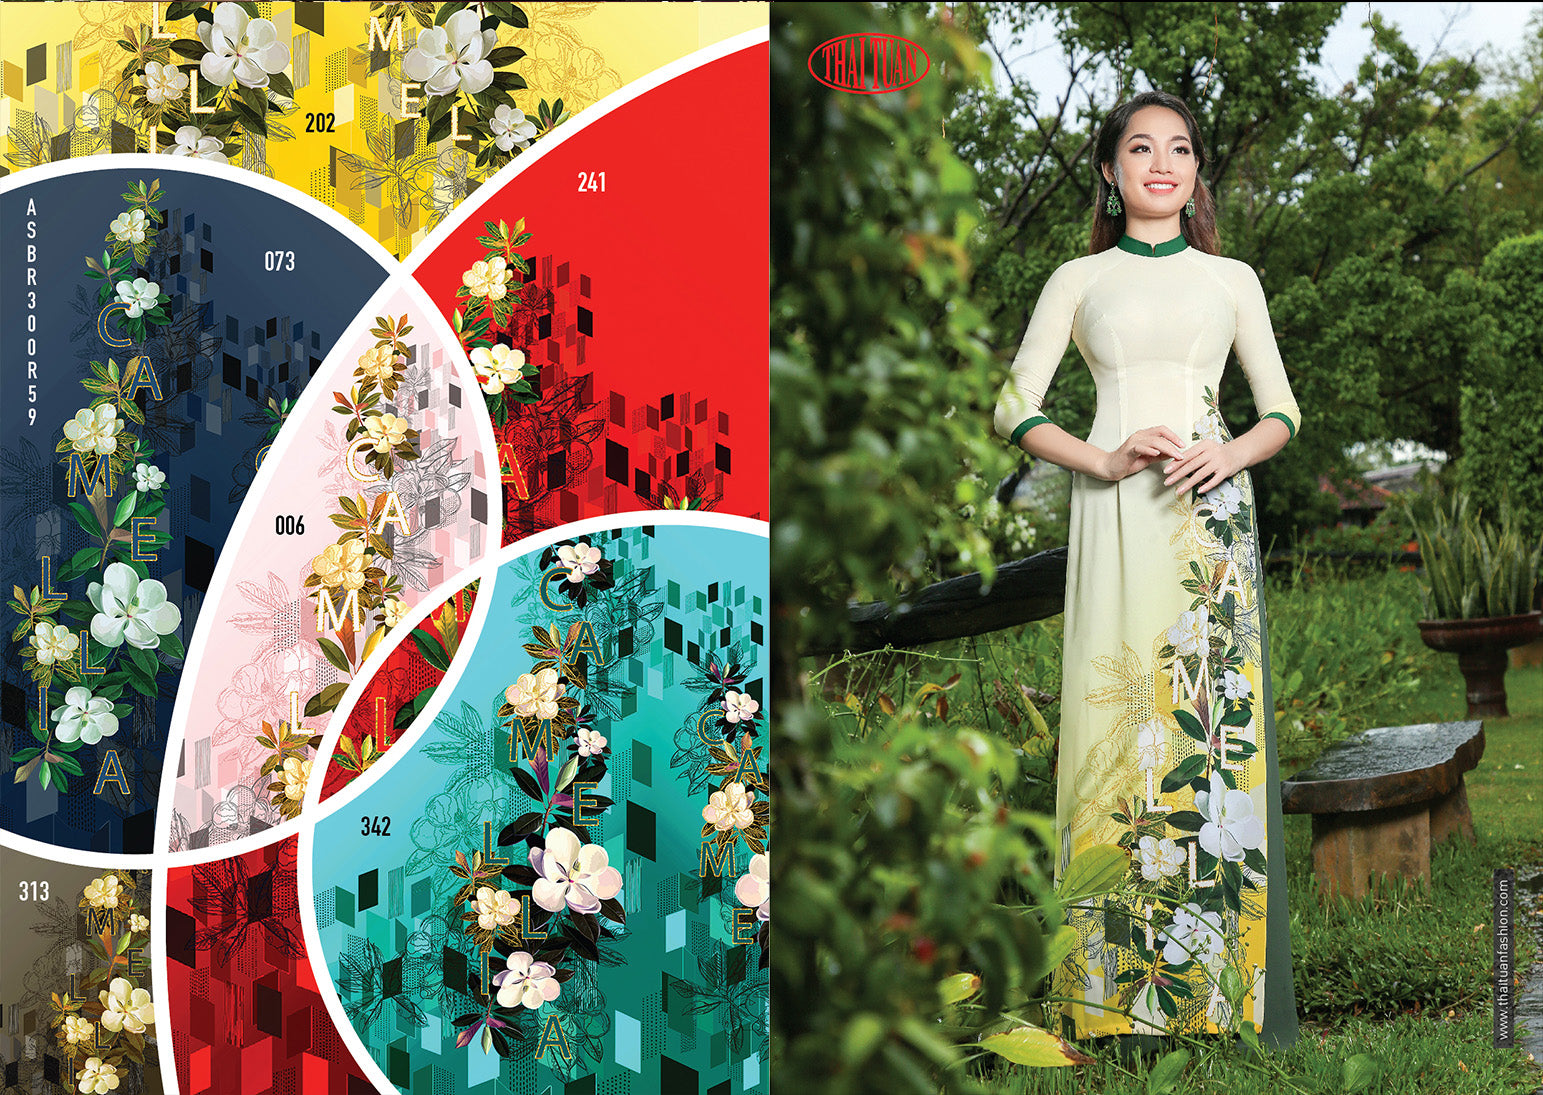 Made-to-measure ao dai by Mark&Vy using high quality, Thai Tuan fabric. Timeless, floral motif.